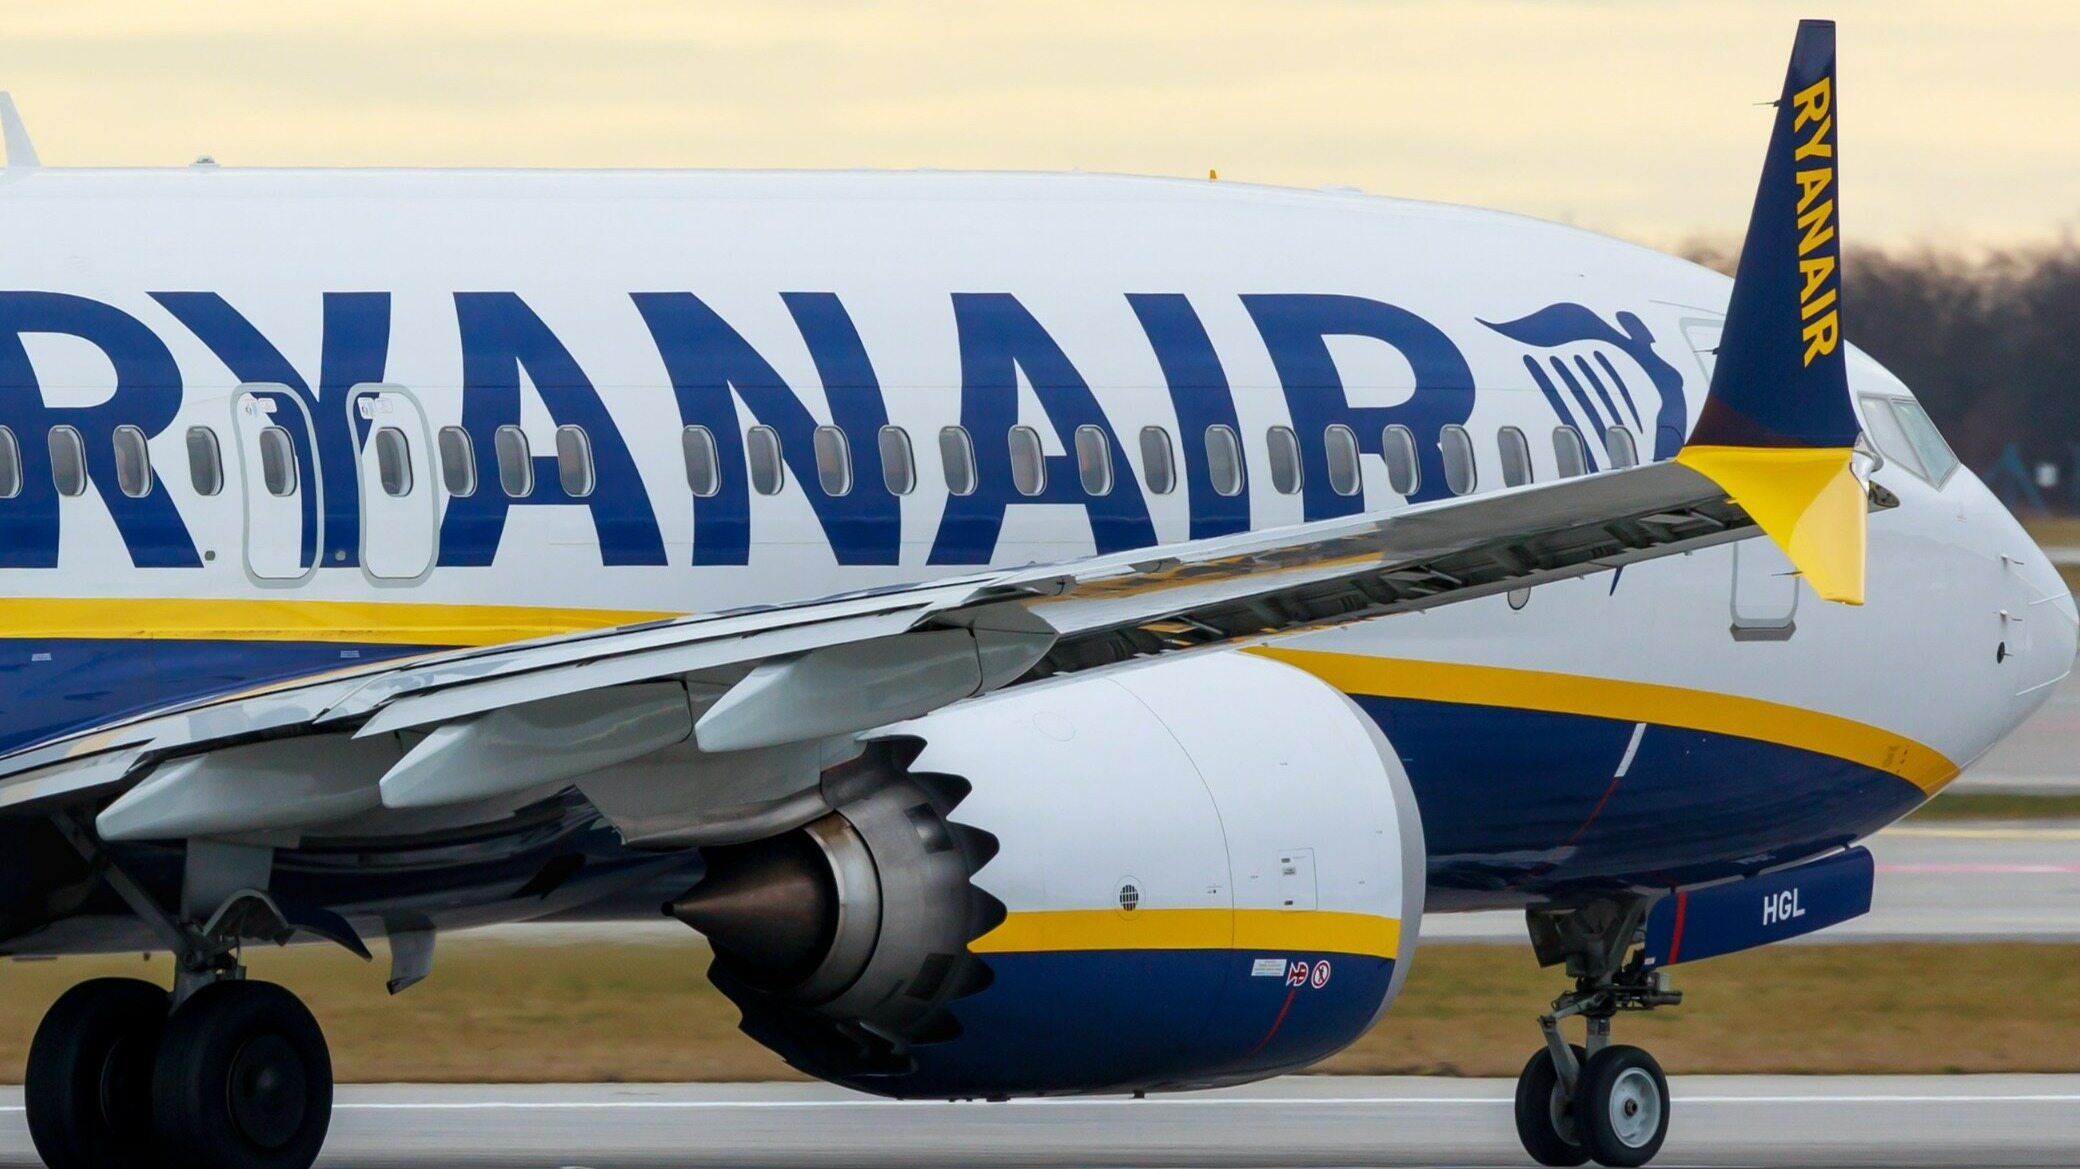 Poles will be delighted.  Ryanair will increase the number of flights just before Christmas